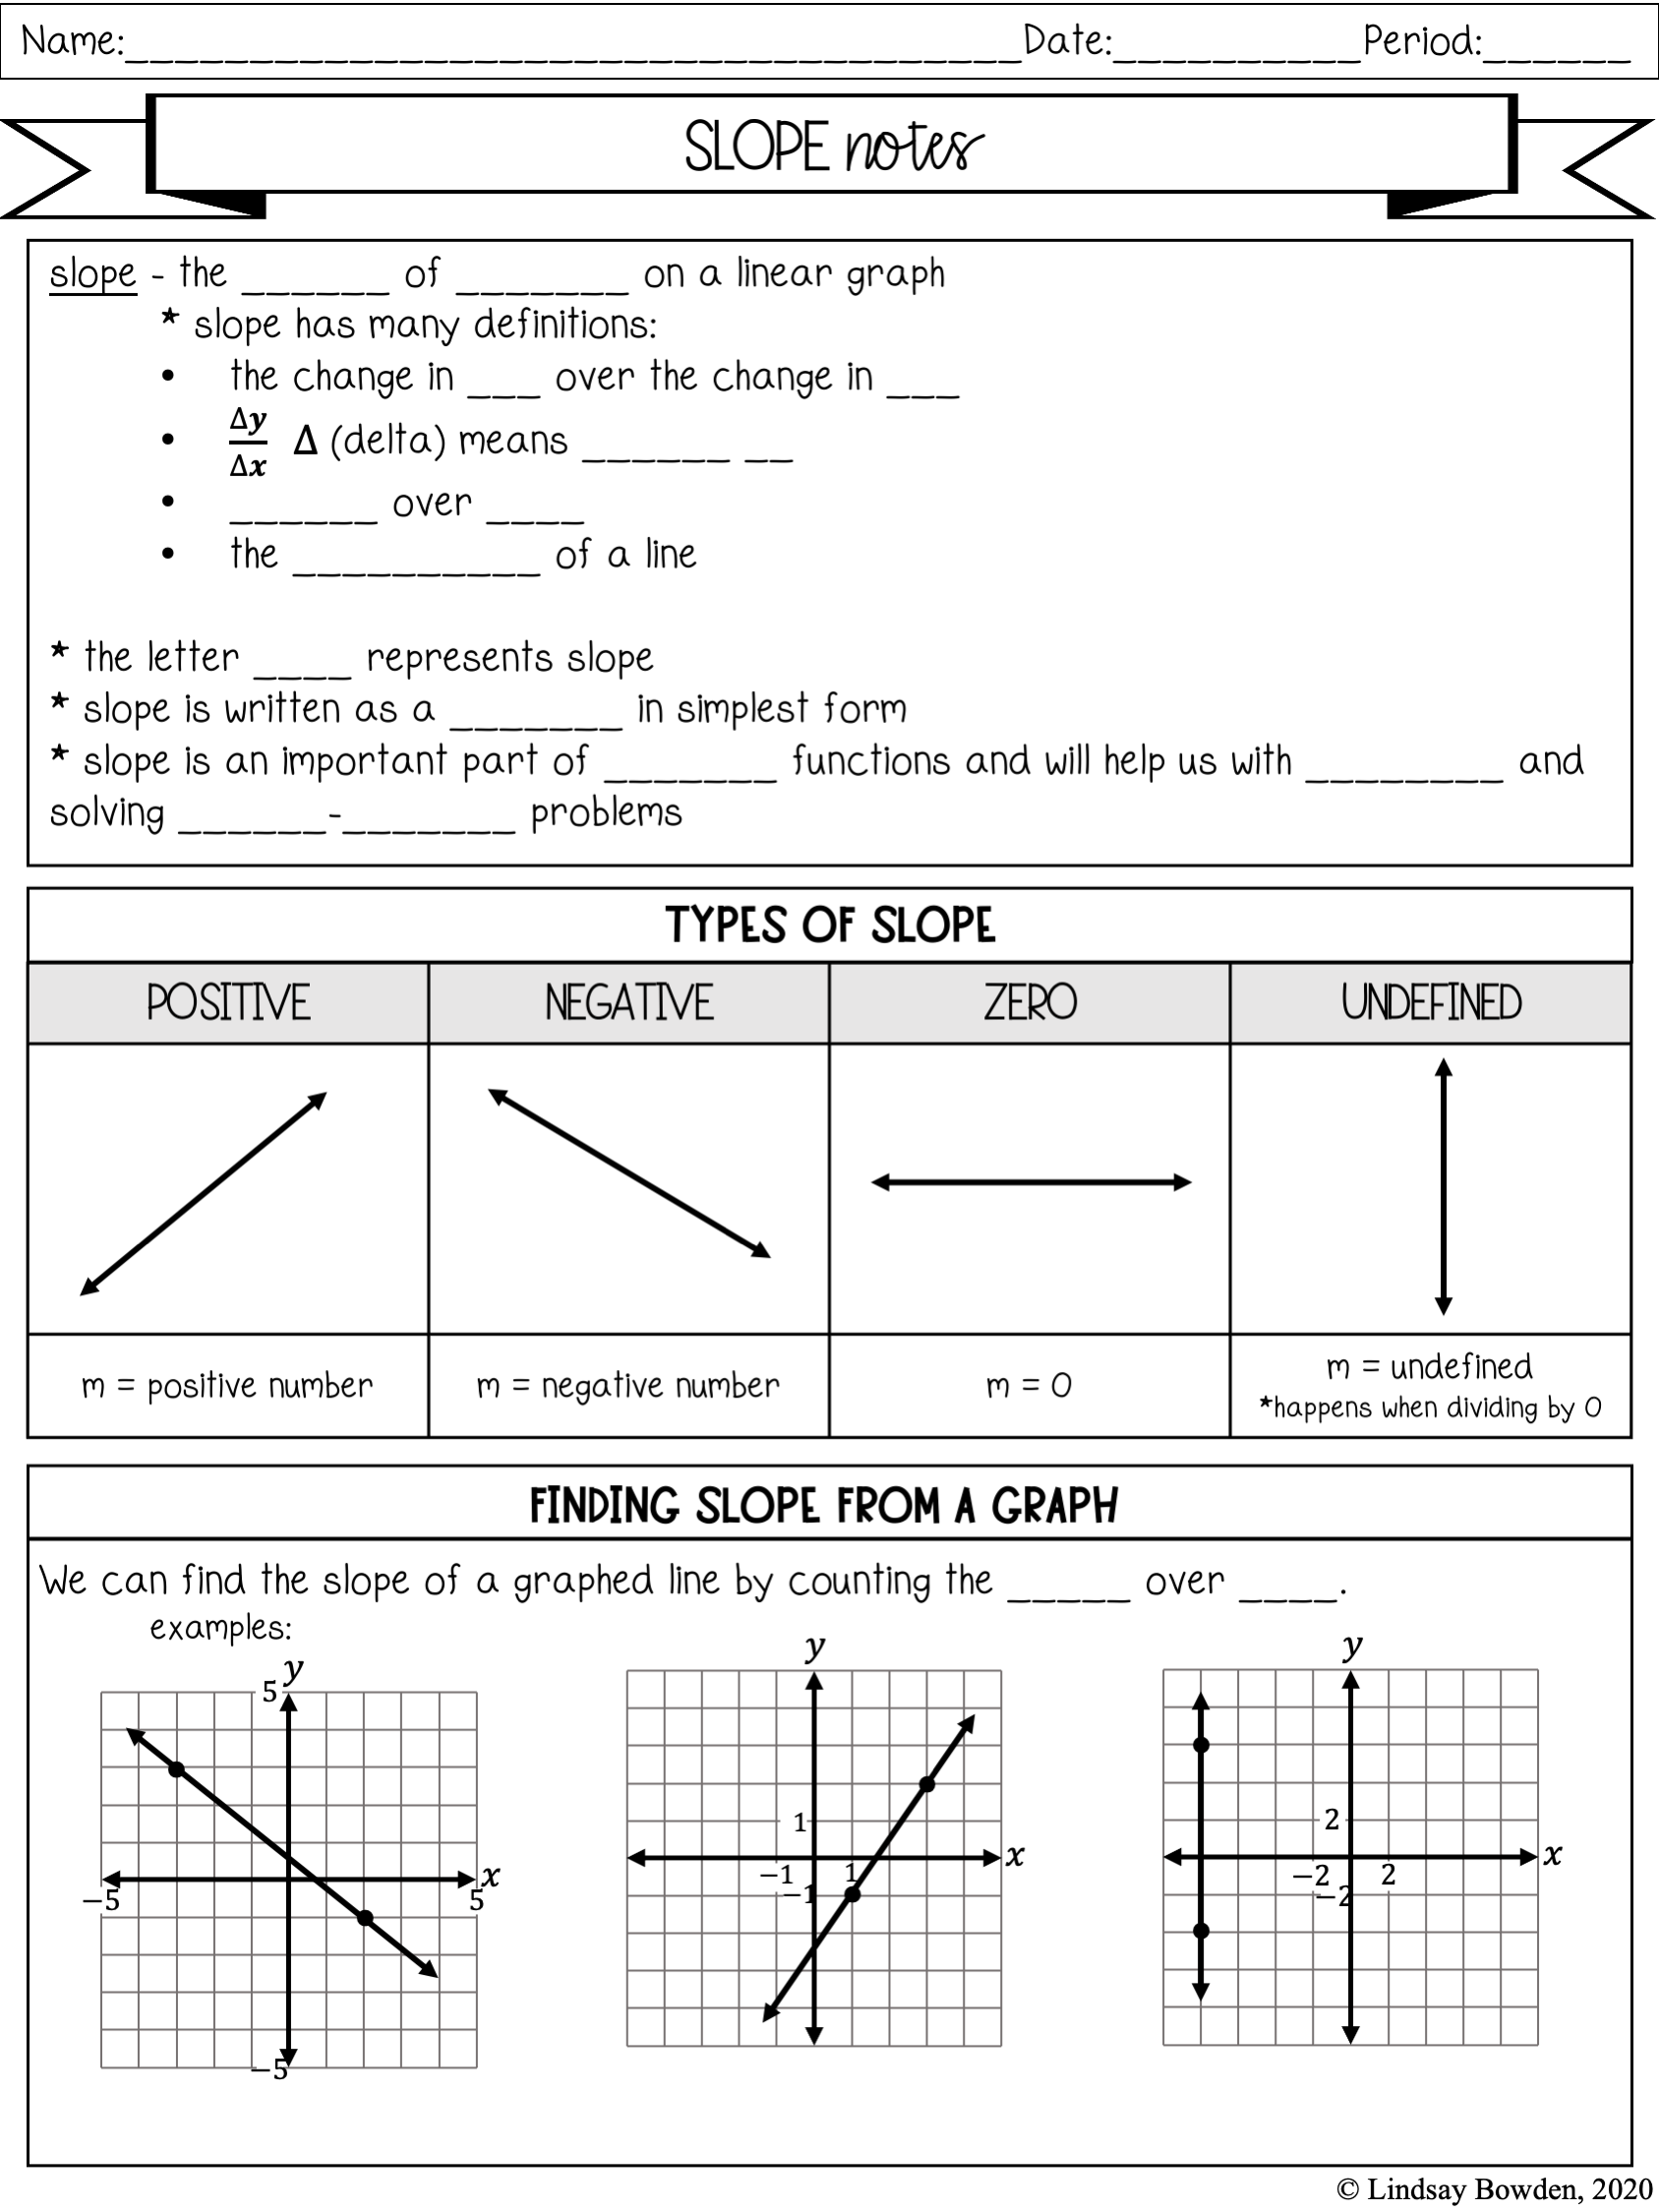 Linear Functions Notes And Worksheets Lindsay Bowden